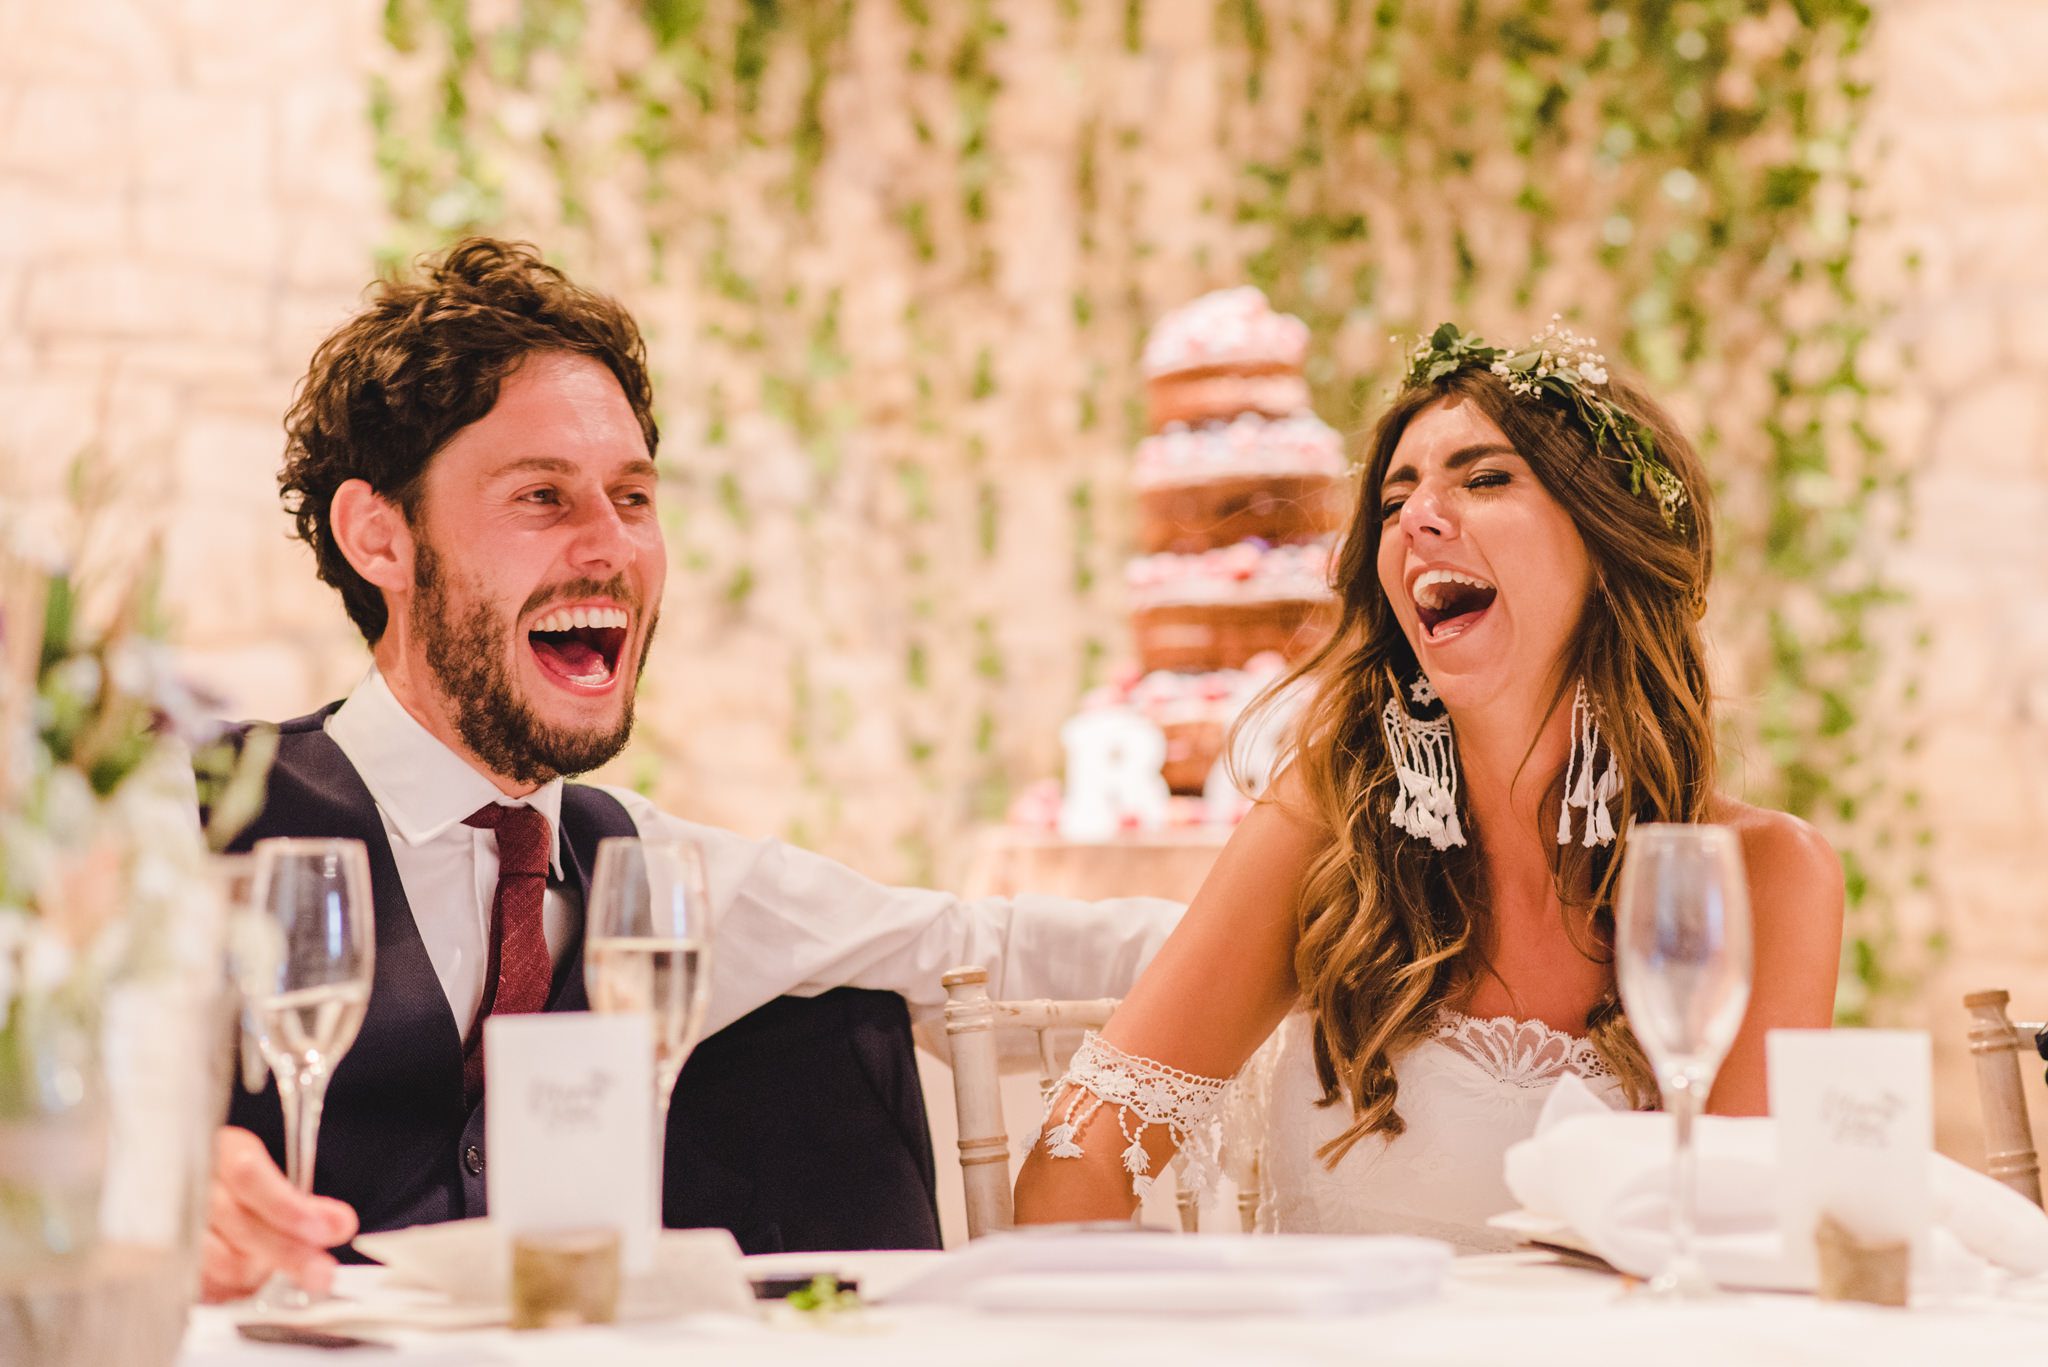 Bride laughing with her whole face